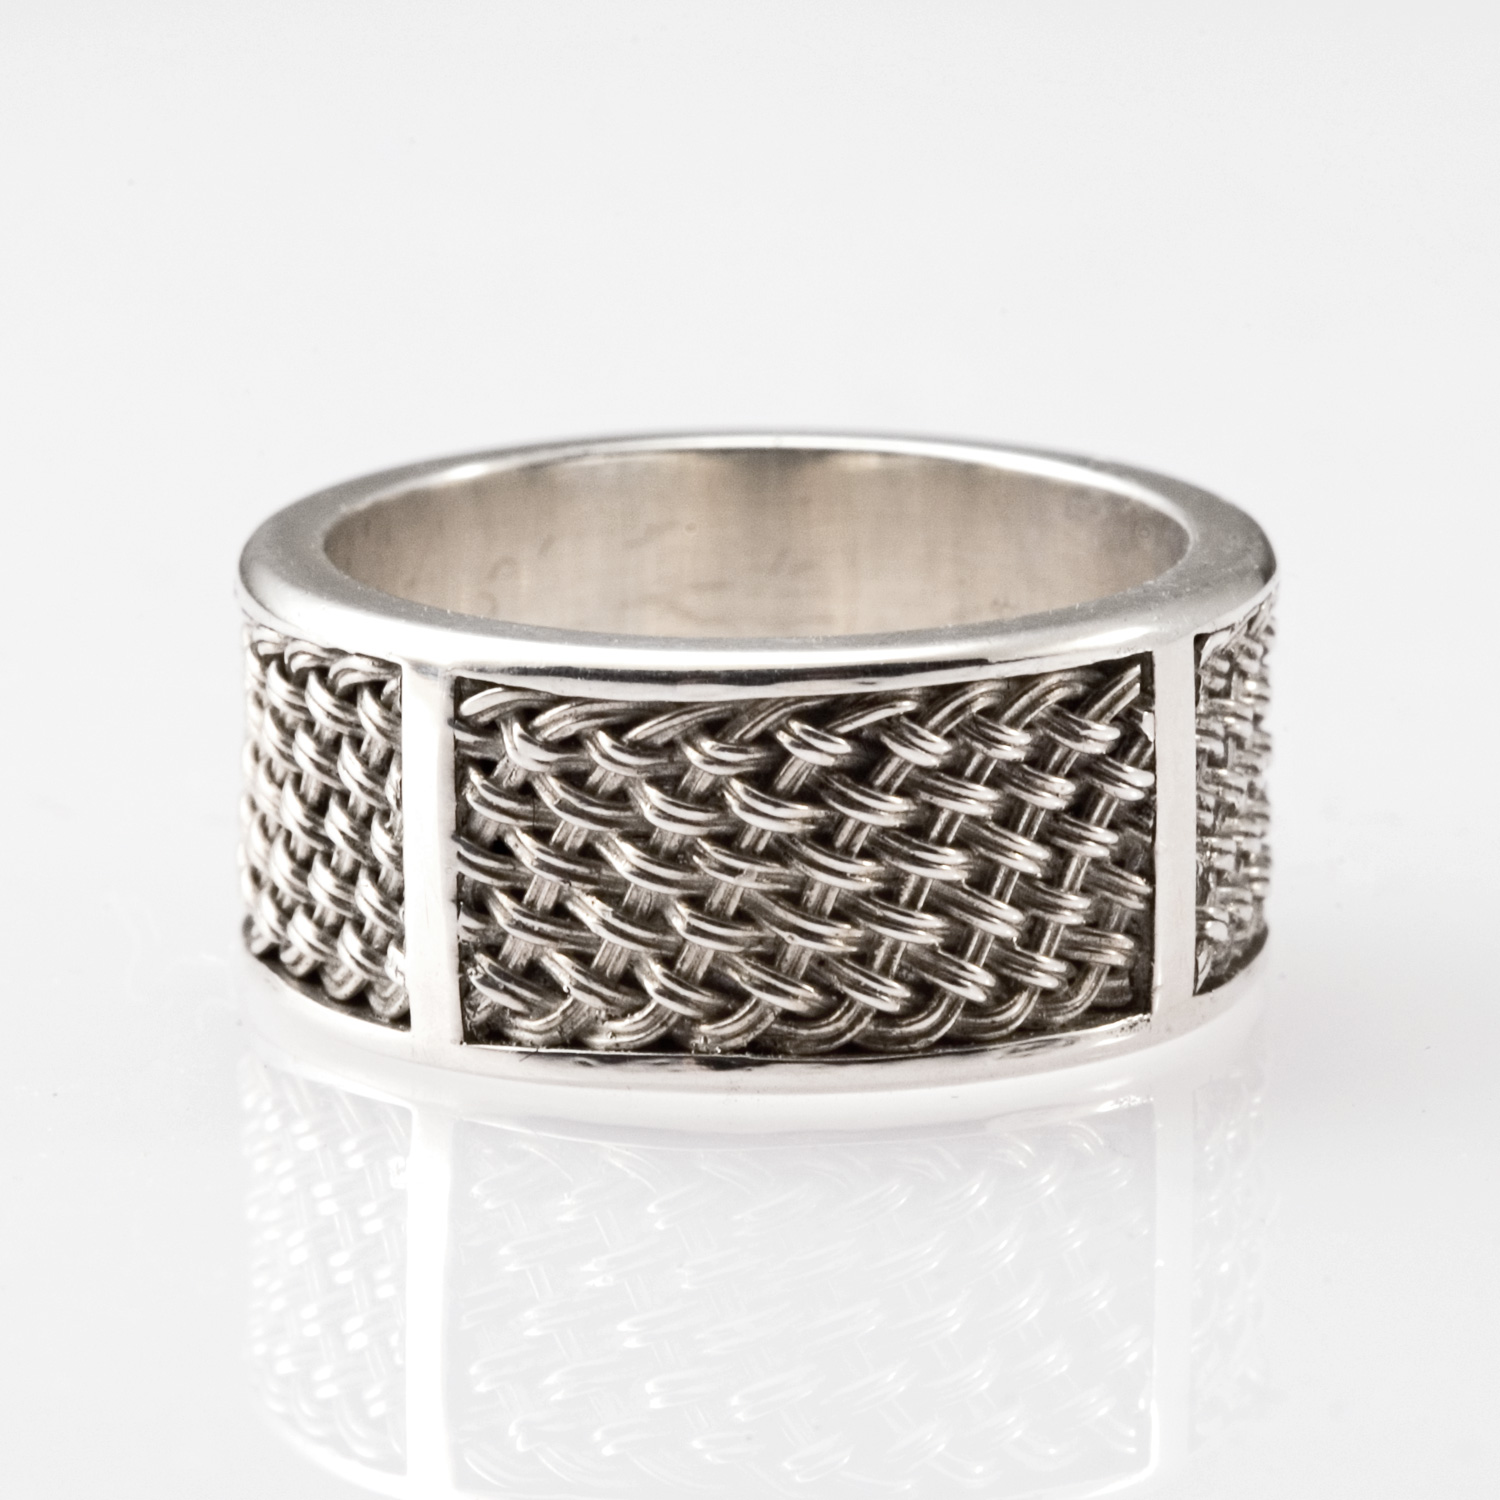 Inset Fine Weave Ring in sterling silver by Tamberlaine